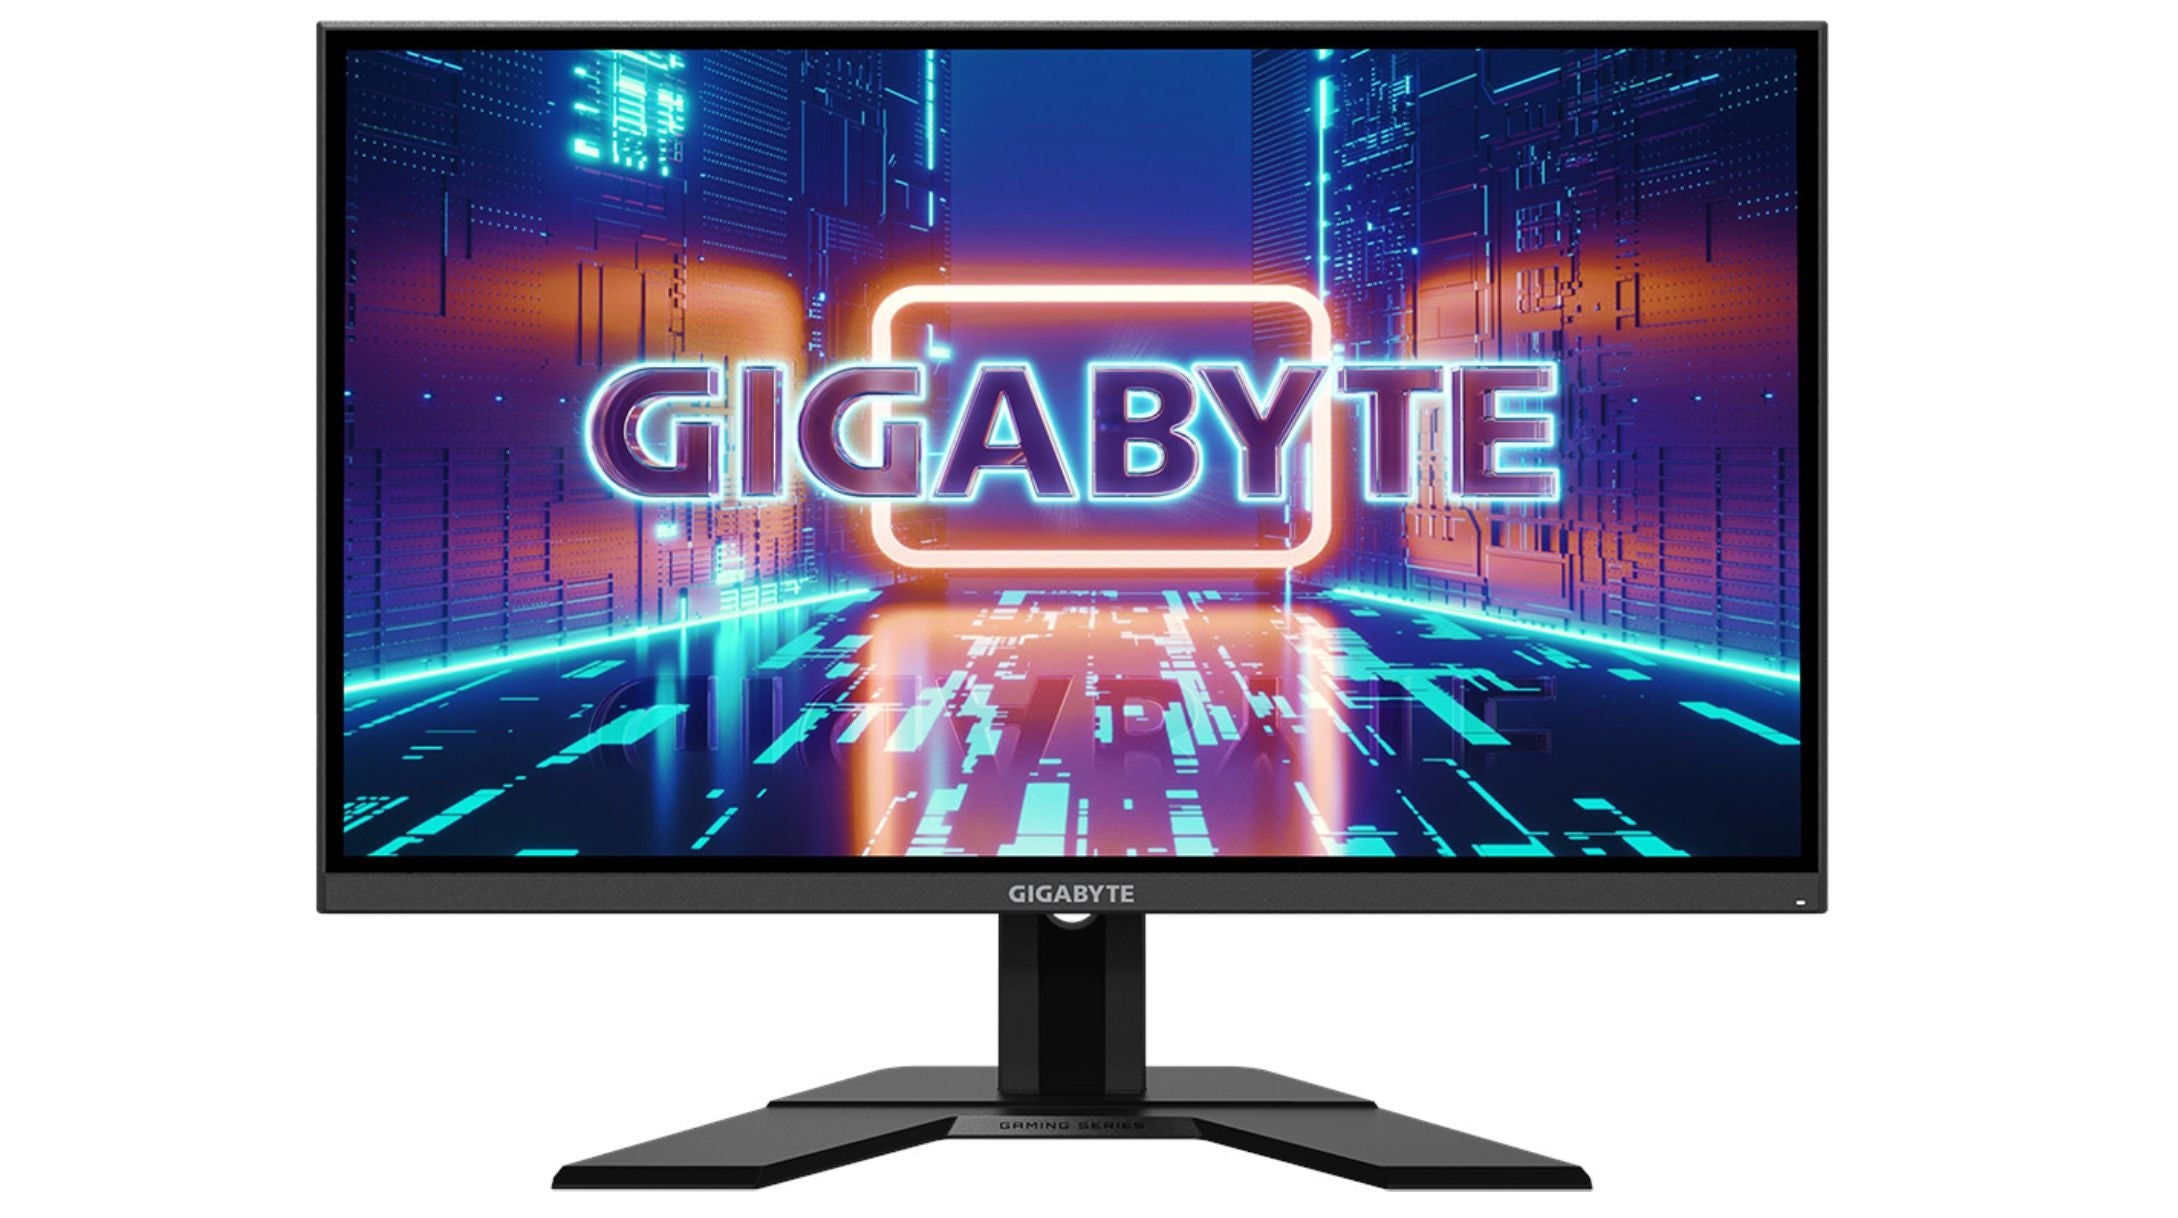 Get a 27-in Fast IPS 1440p 144Hz monitor for £238